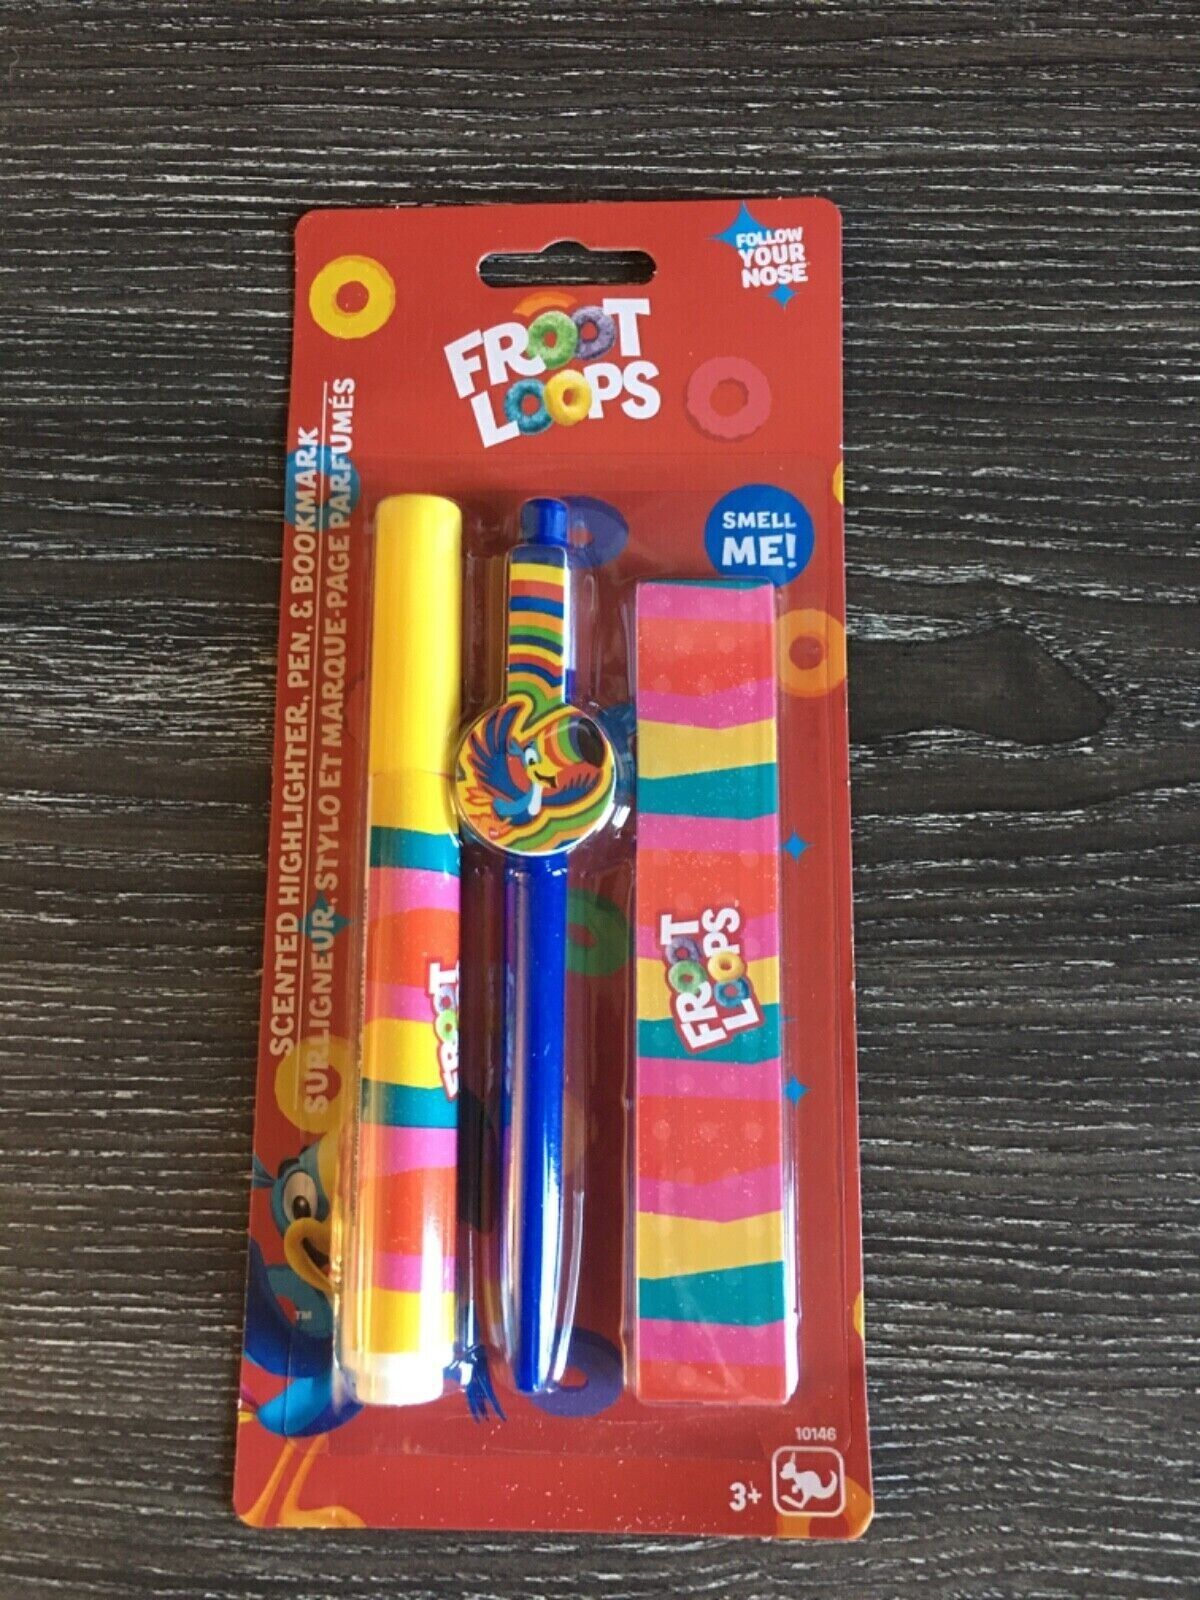 NEW FROOT LOOPS SCENTED LOT CEREAL SCENTED HIGHLIGHTER PEN BOOKMARK SET